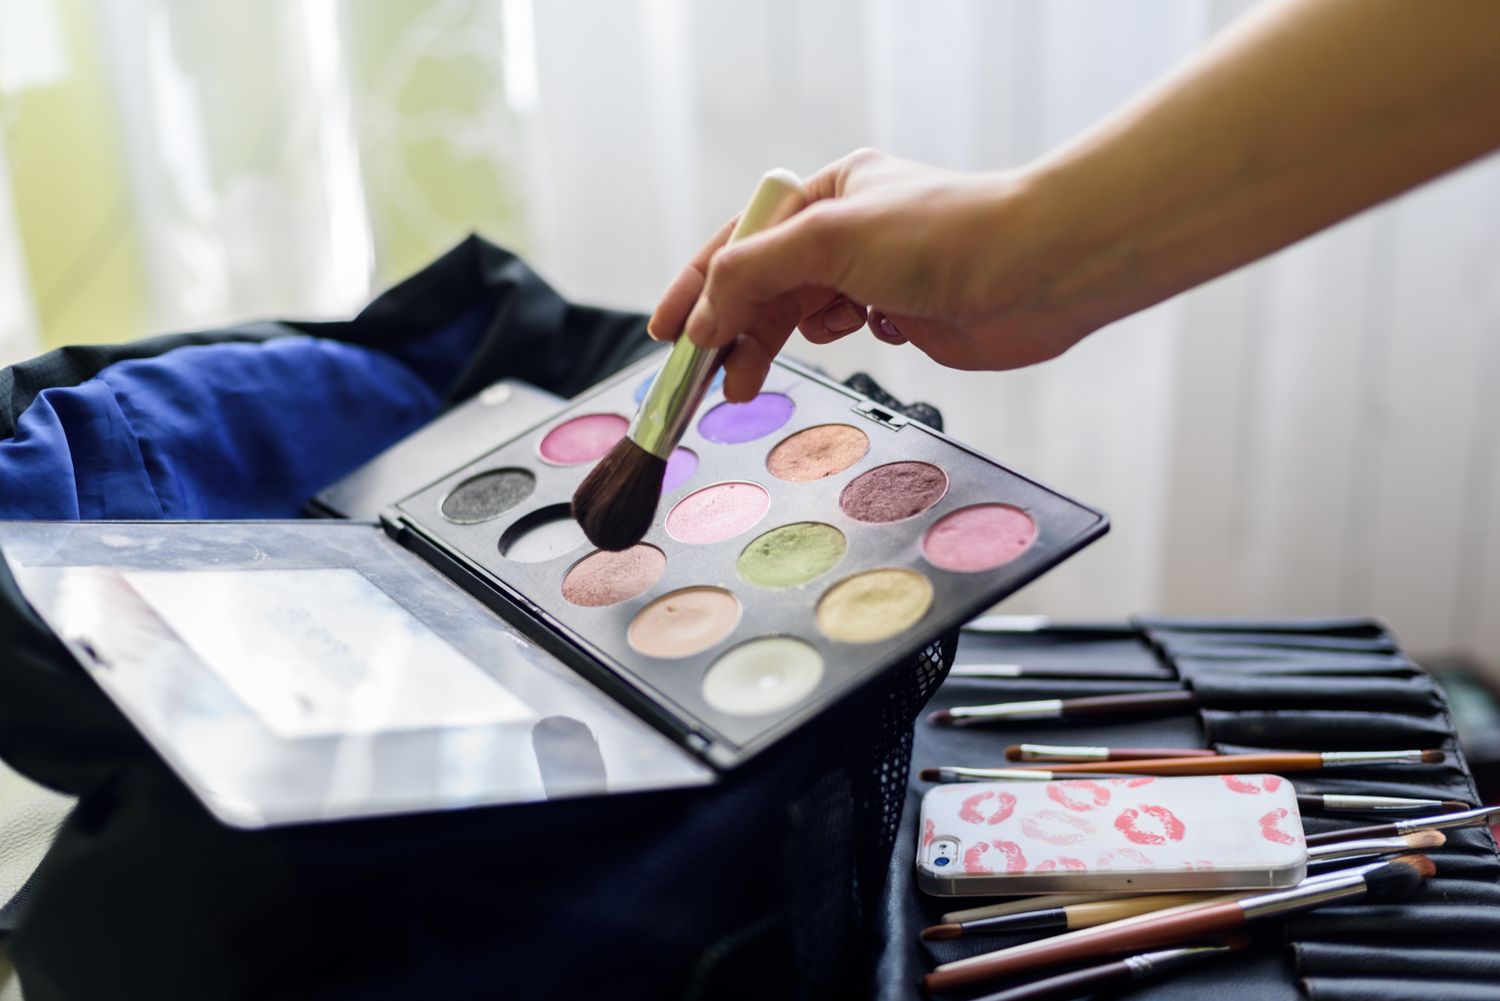 Essential Products for Building Your Makeup Collection